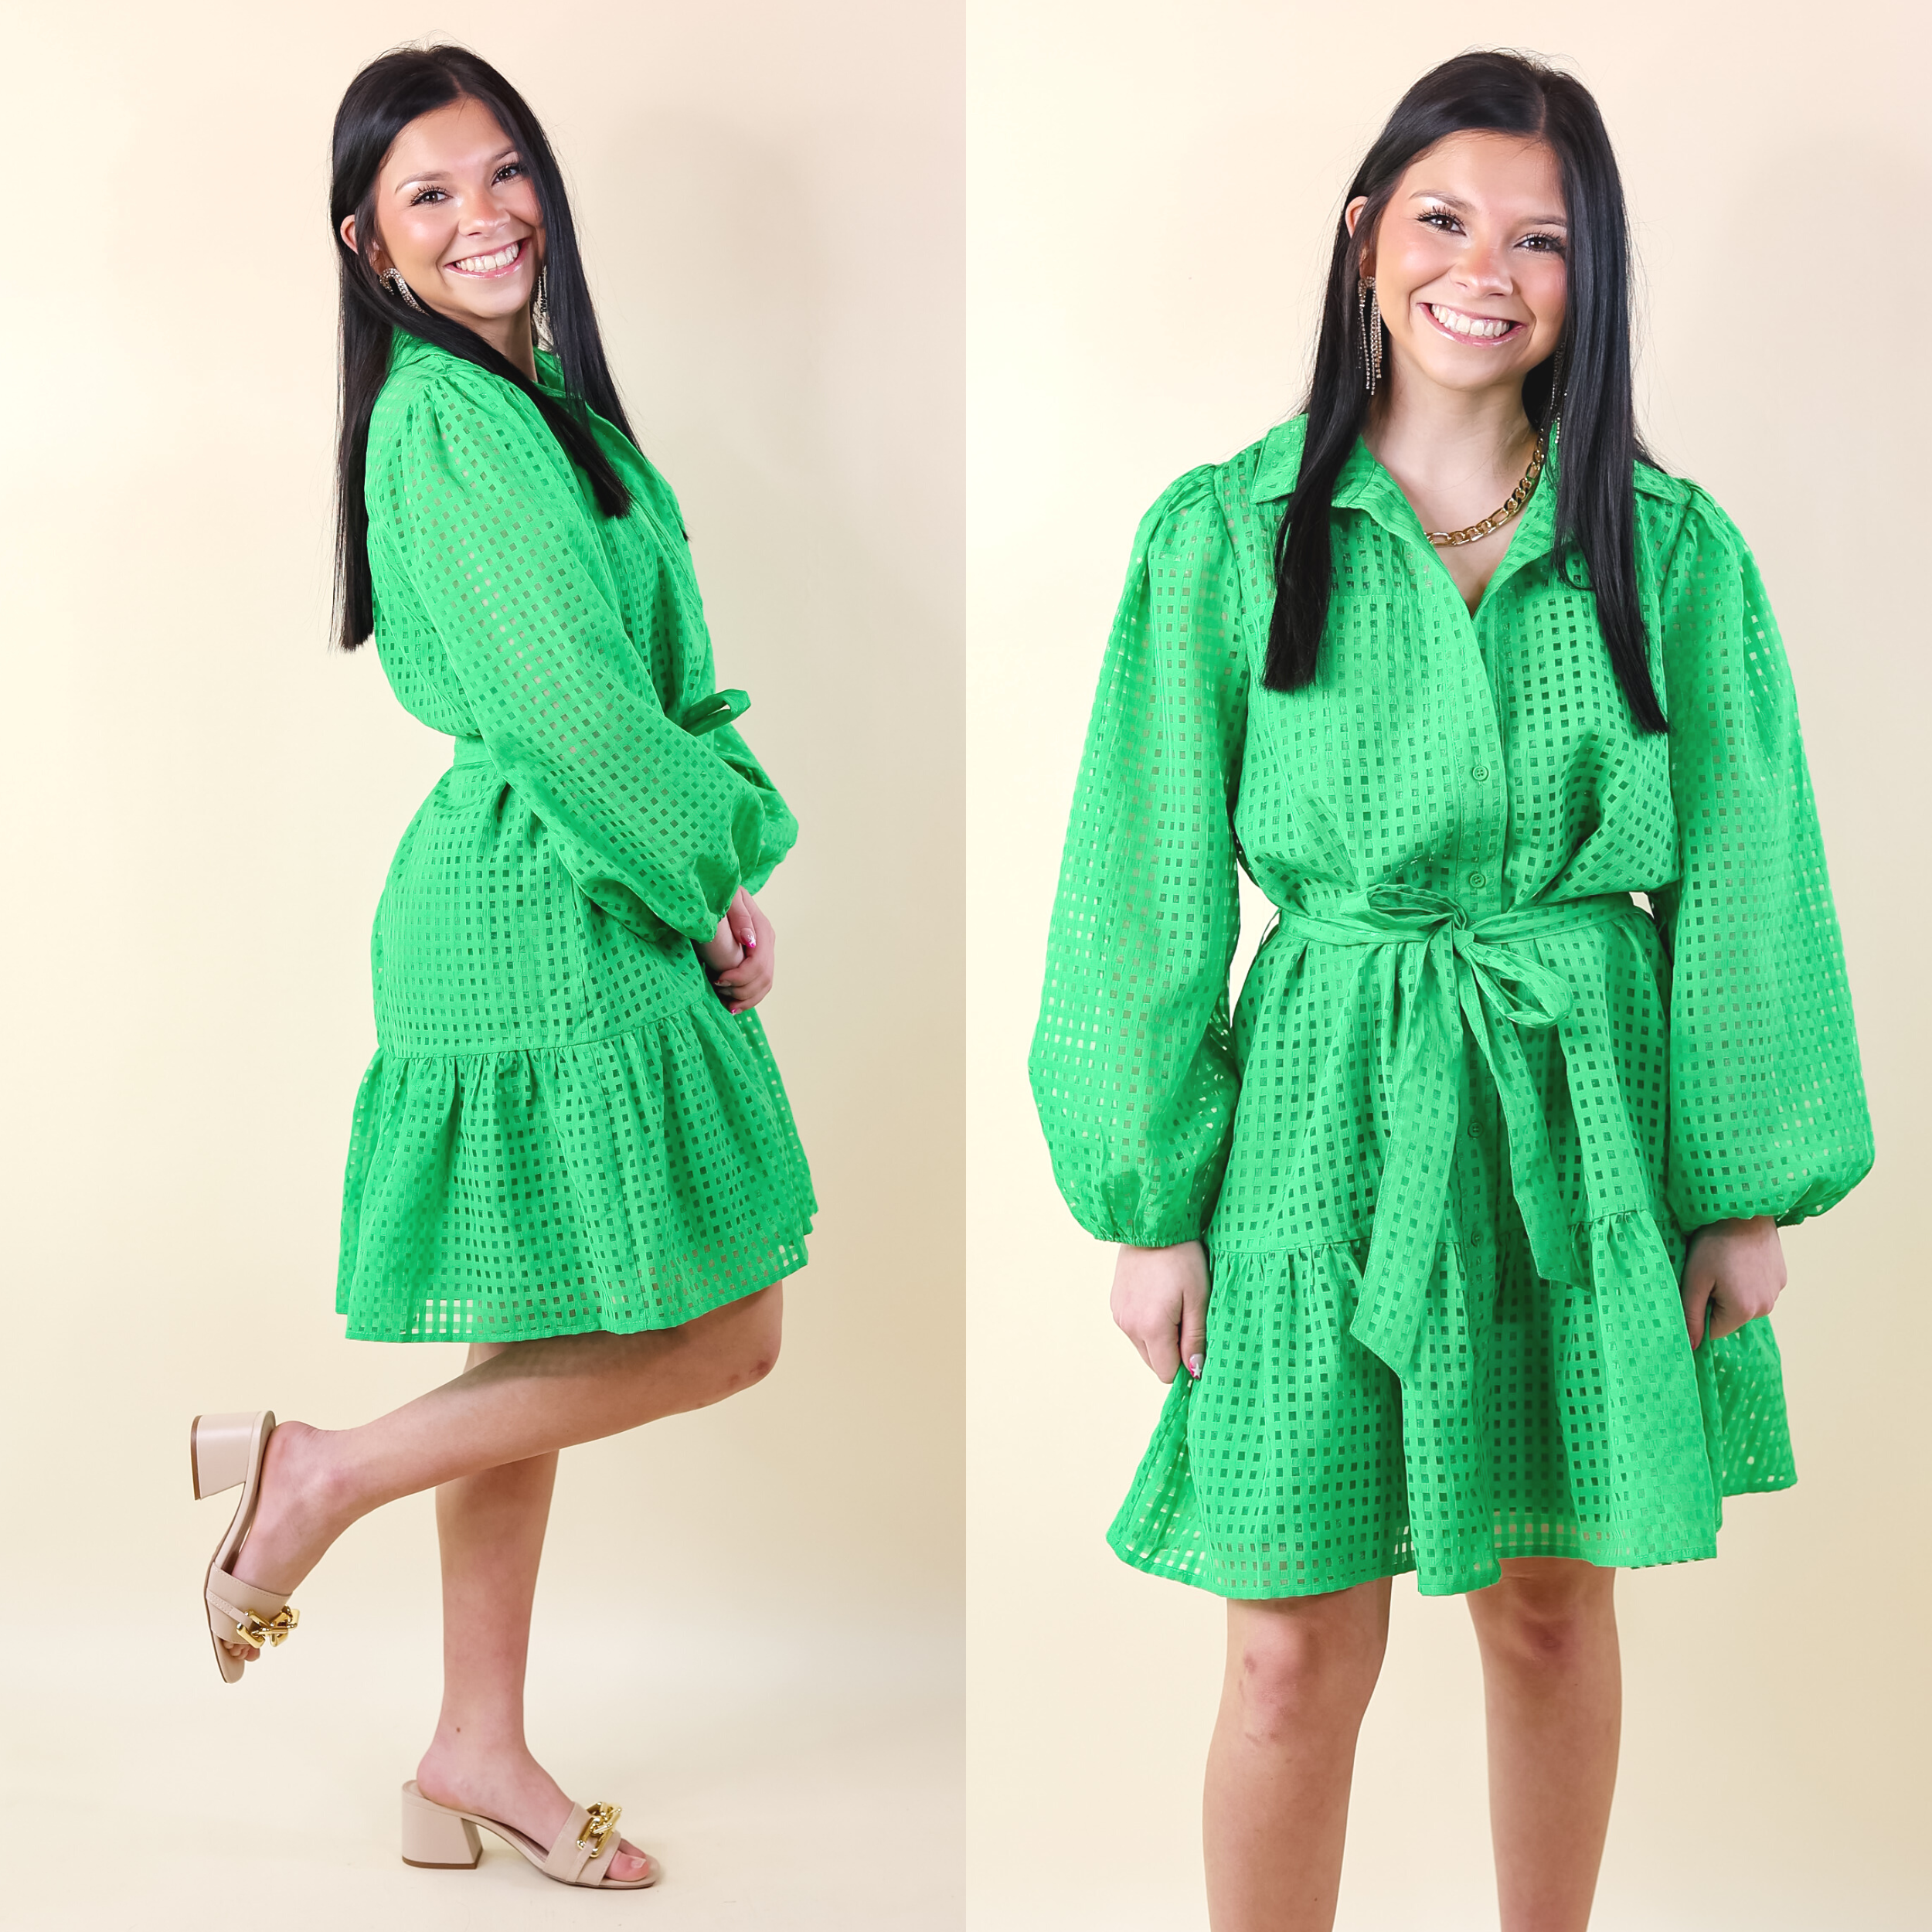 Fresh Air Sheer Gingham Print Button Up Dress in Green - Giddy Up Glamour Boutique